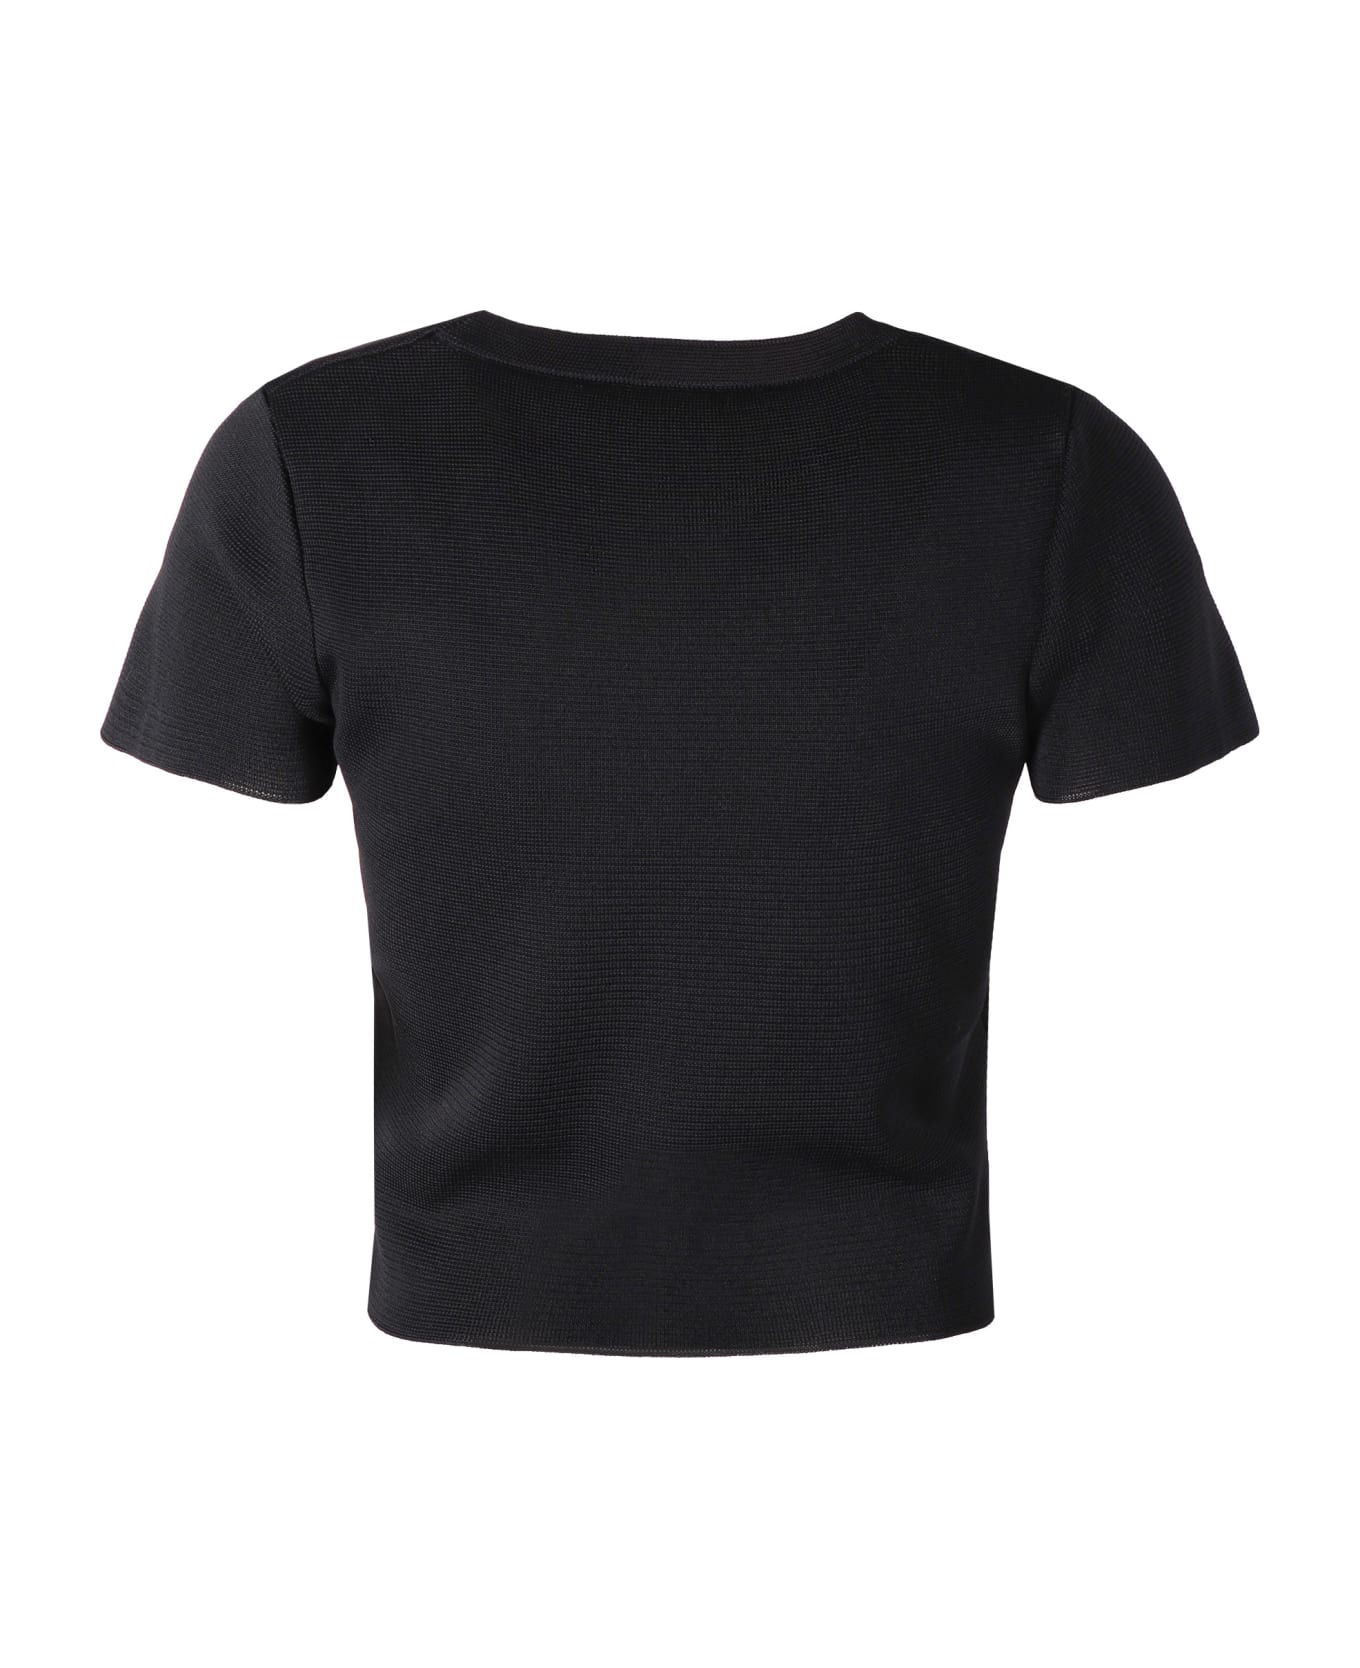 Our Legacy Knit Cropped T-shirt - black